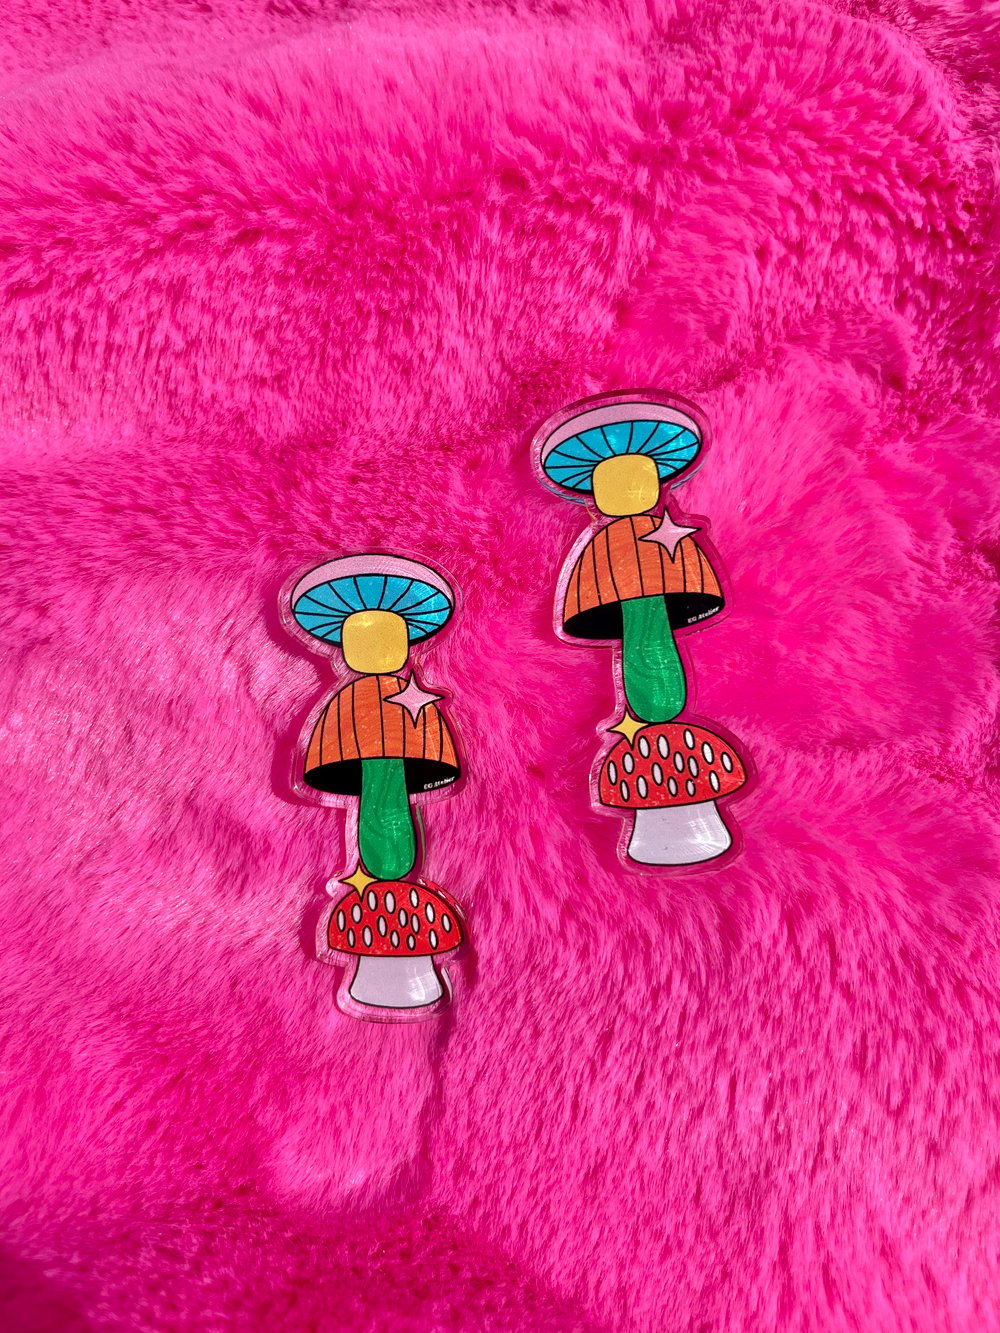 Image of Chill Shrooms earrings